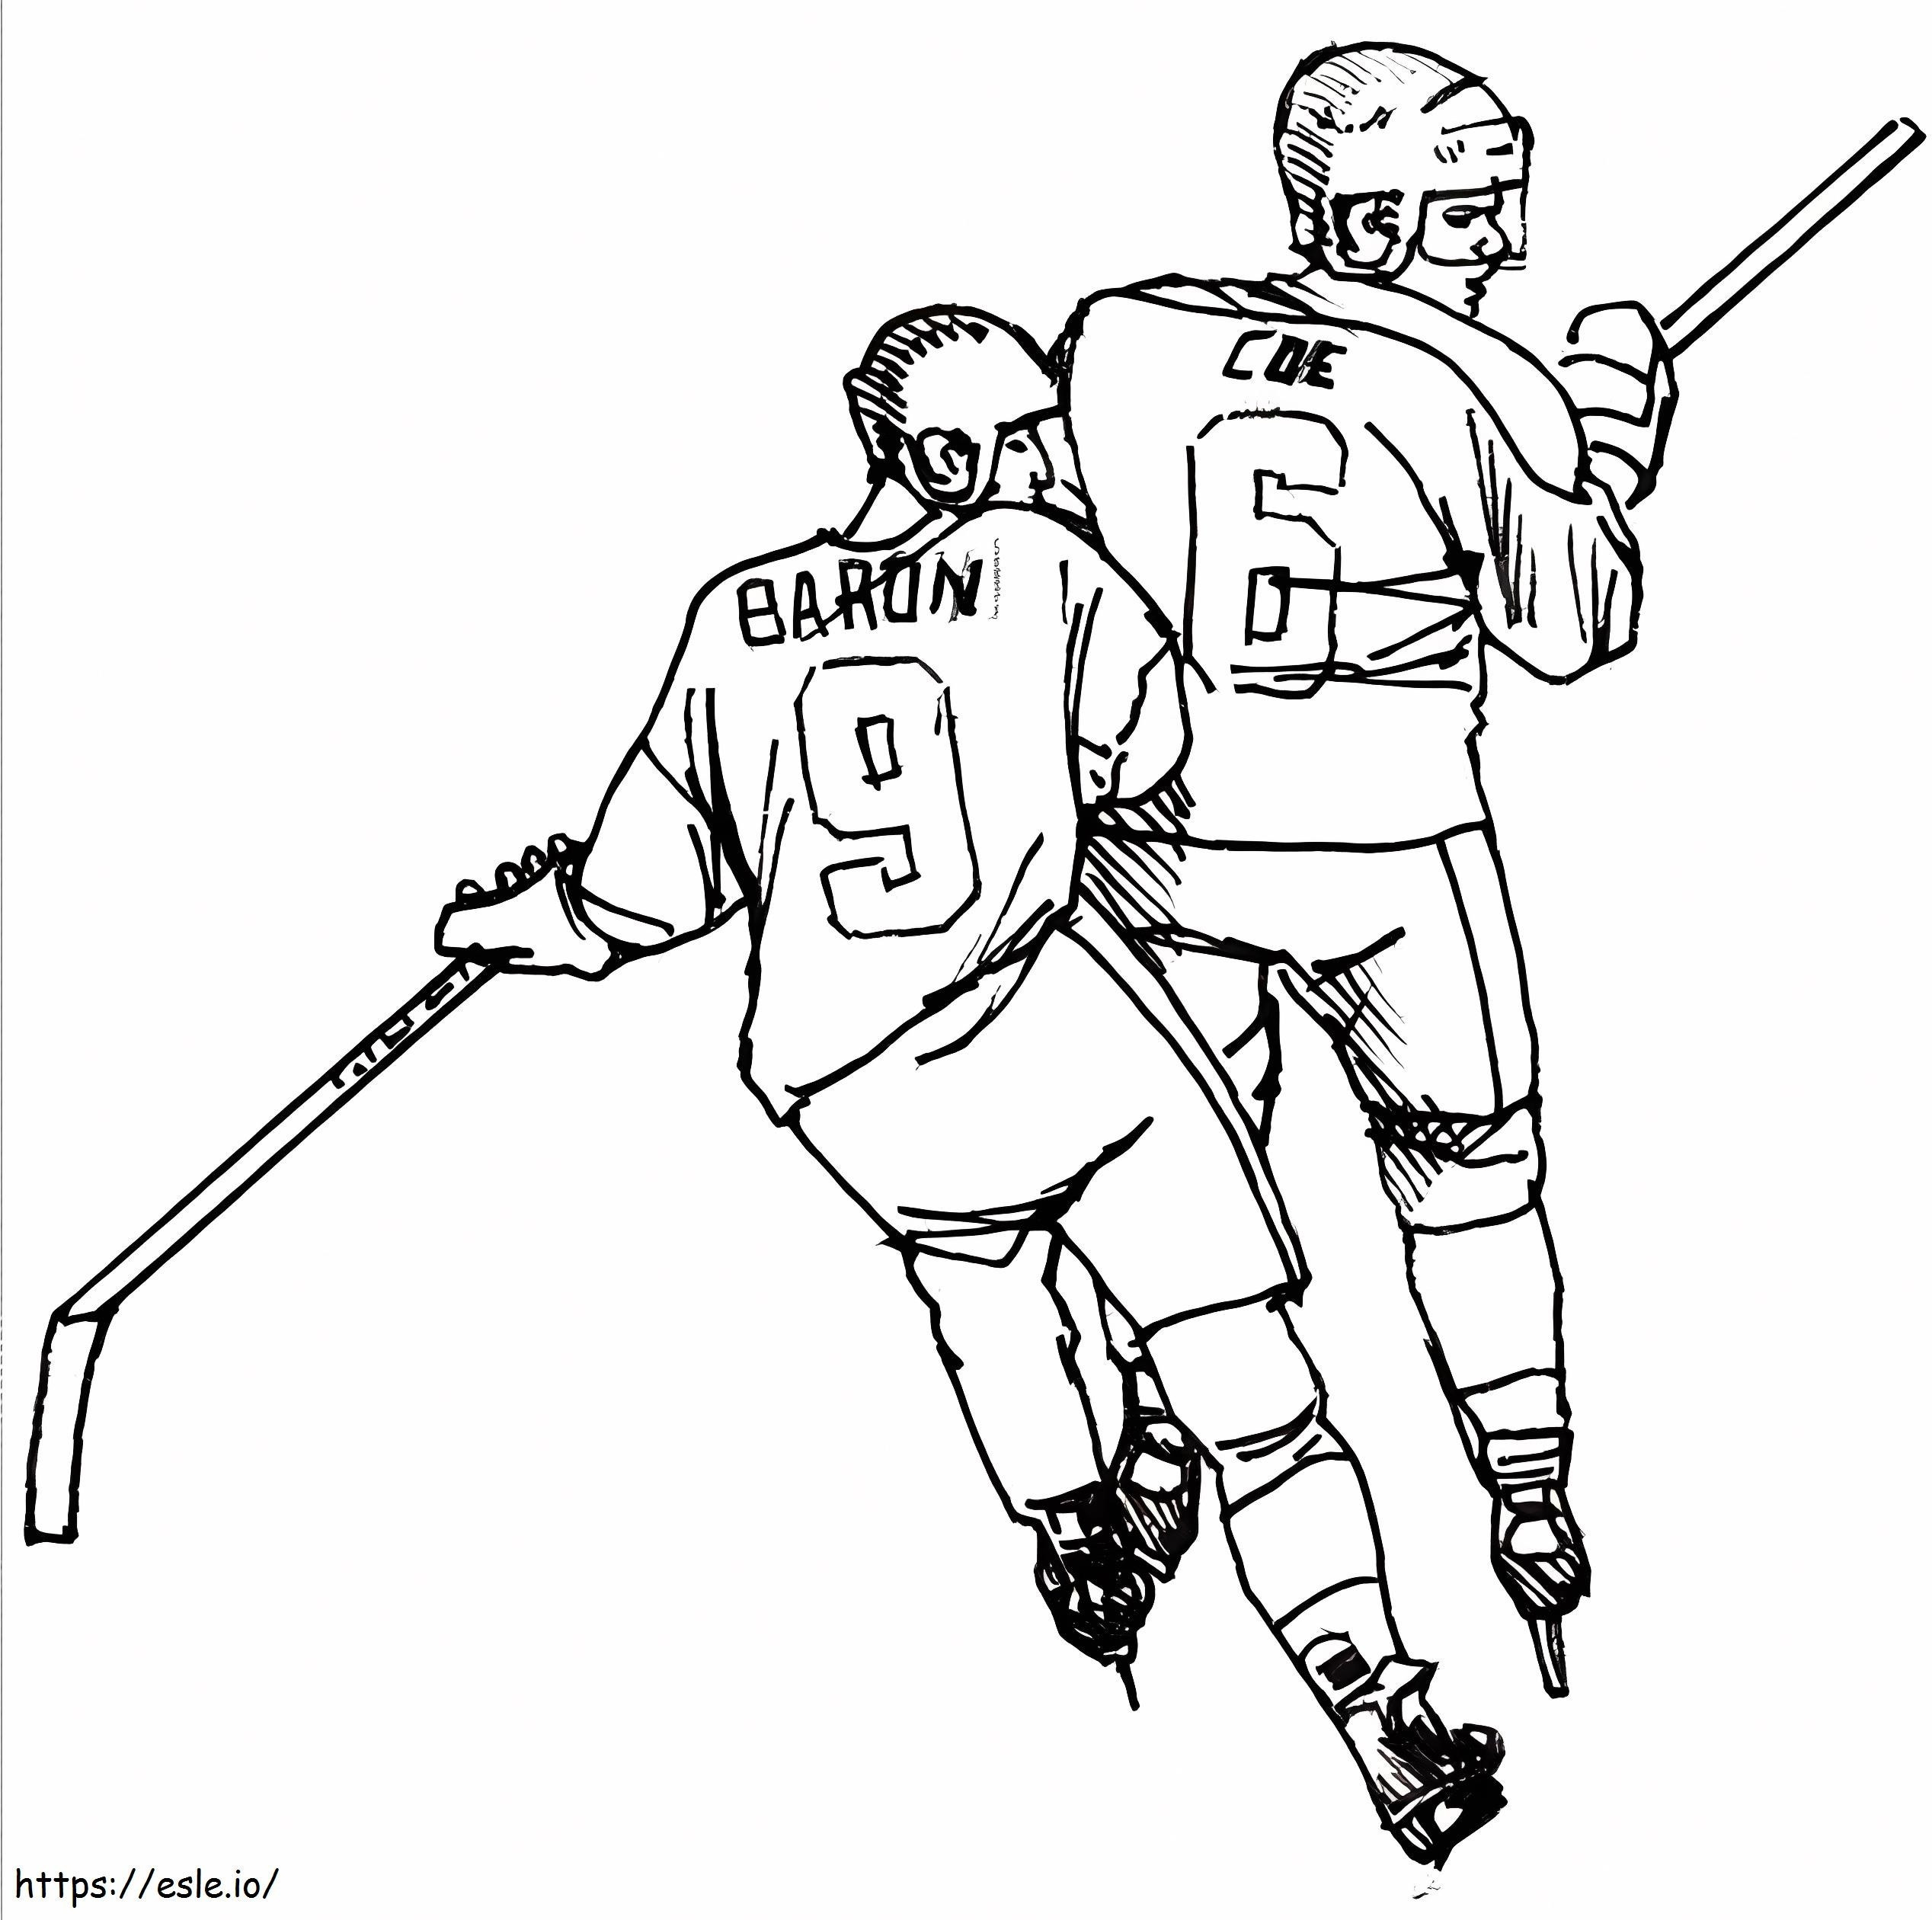 Two Lacrosse Players coloring page